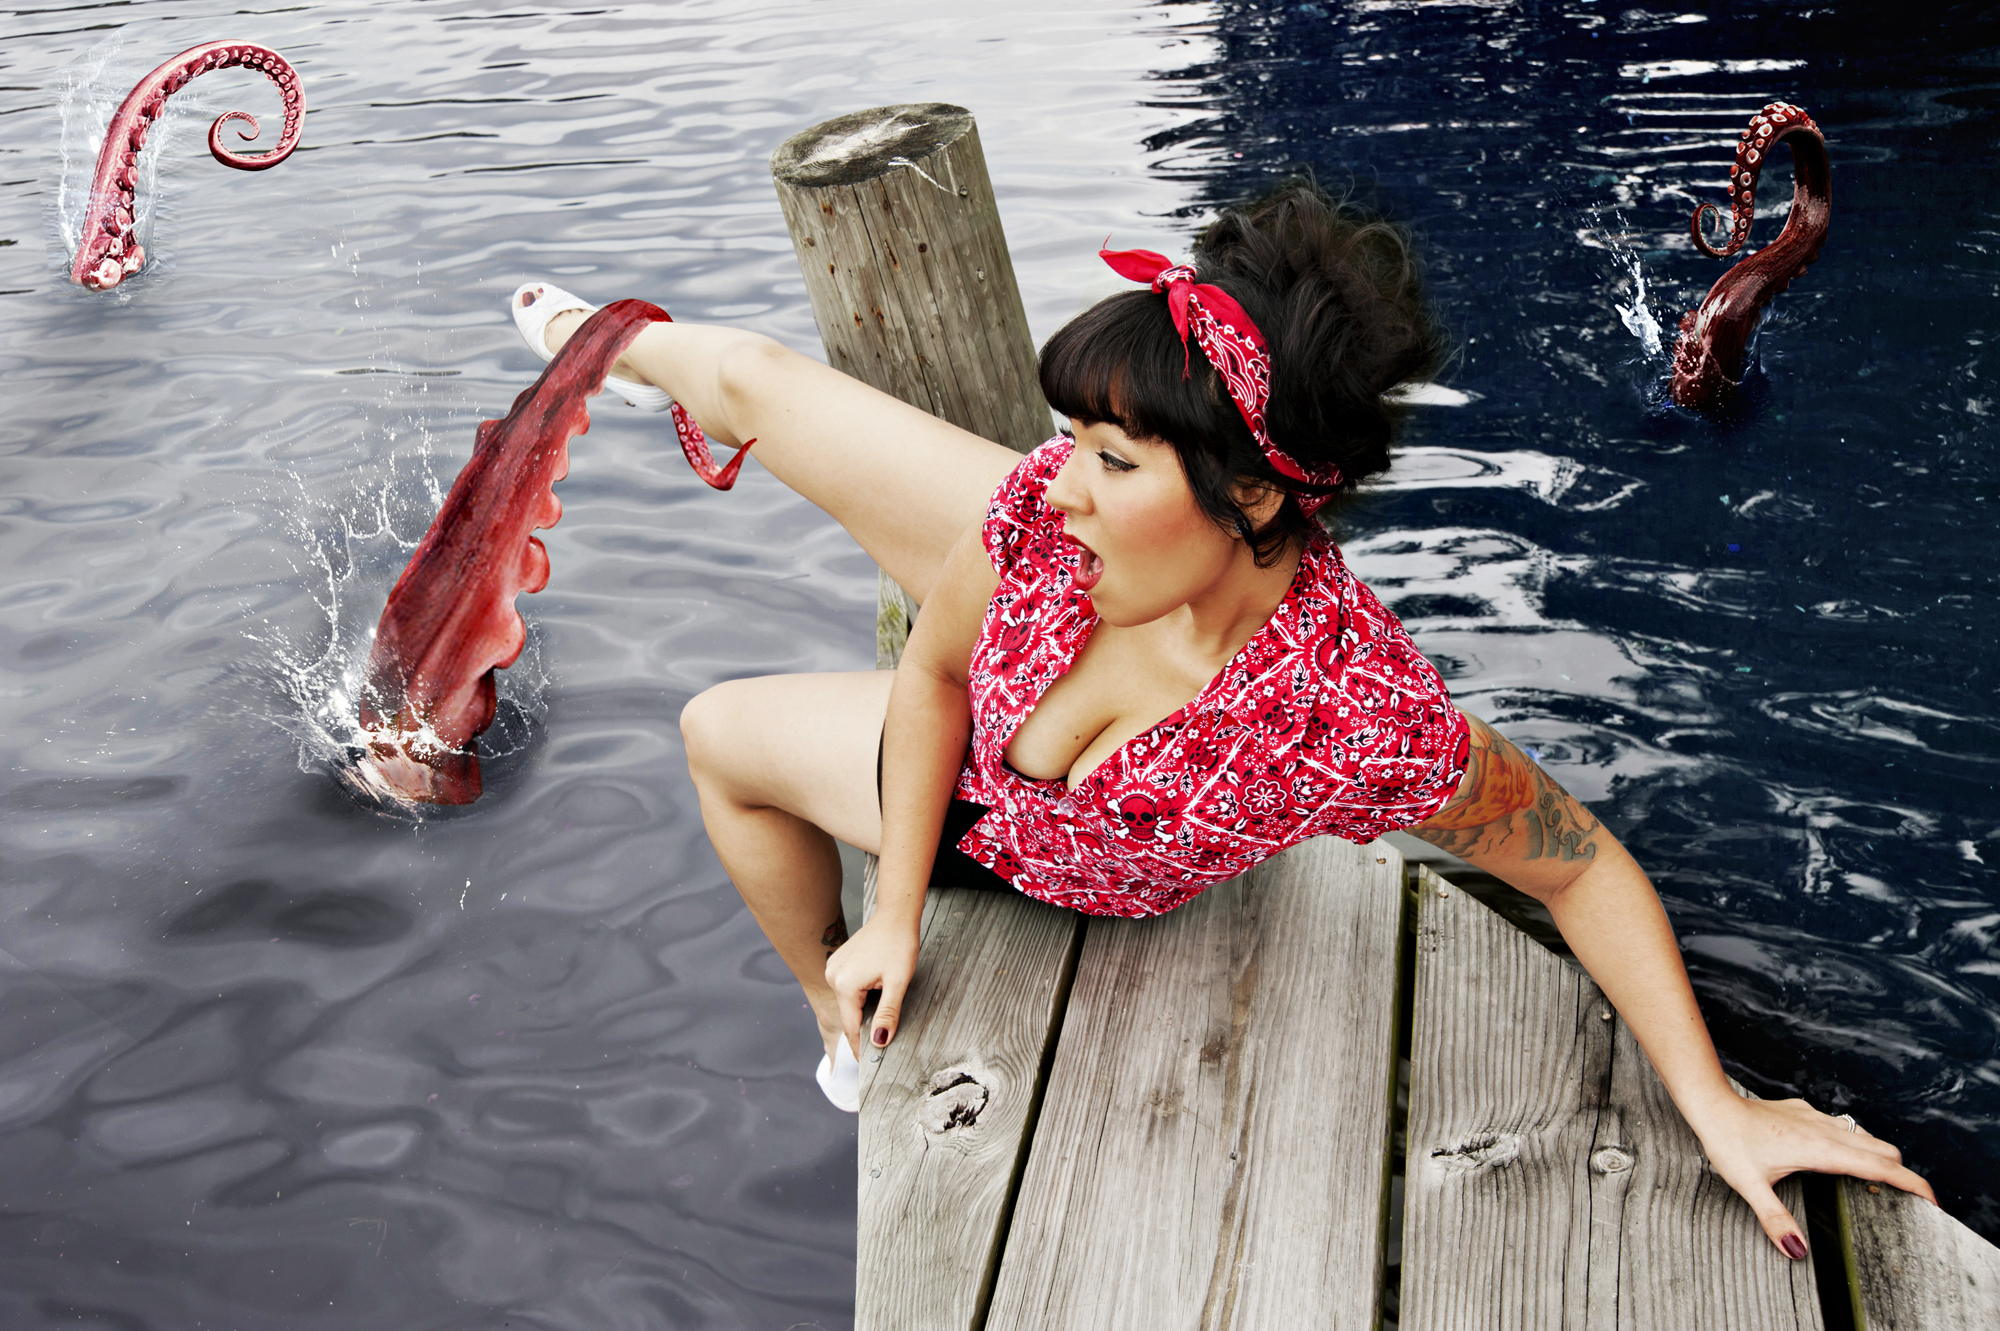 Michelle Yoder creative pinup photography